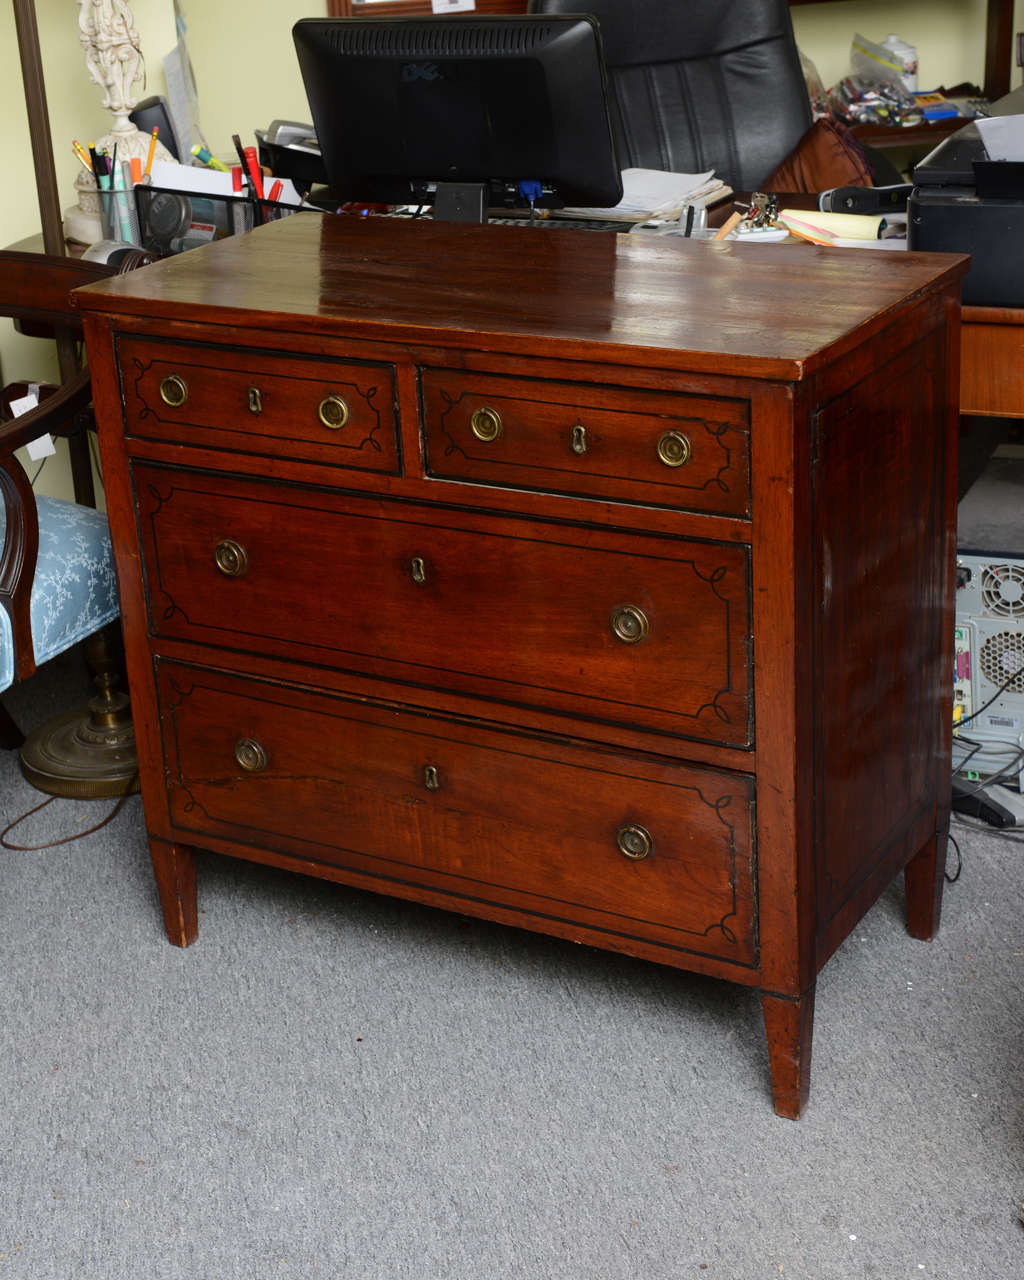 This is a very nice early American solid mahogany chest of drawers circa 1870., to the side and front it has ebony string inlay, there are a few little marks with age but apart from that its in pretty good condition.
the drawers are solid wood with